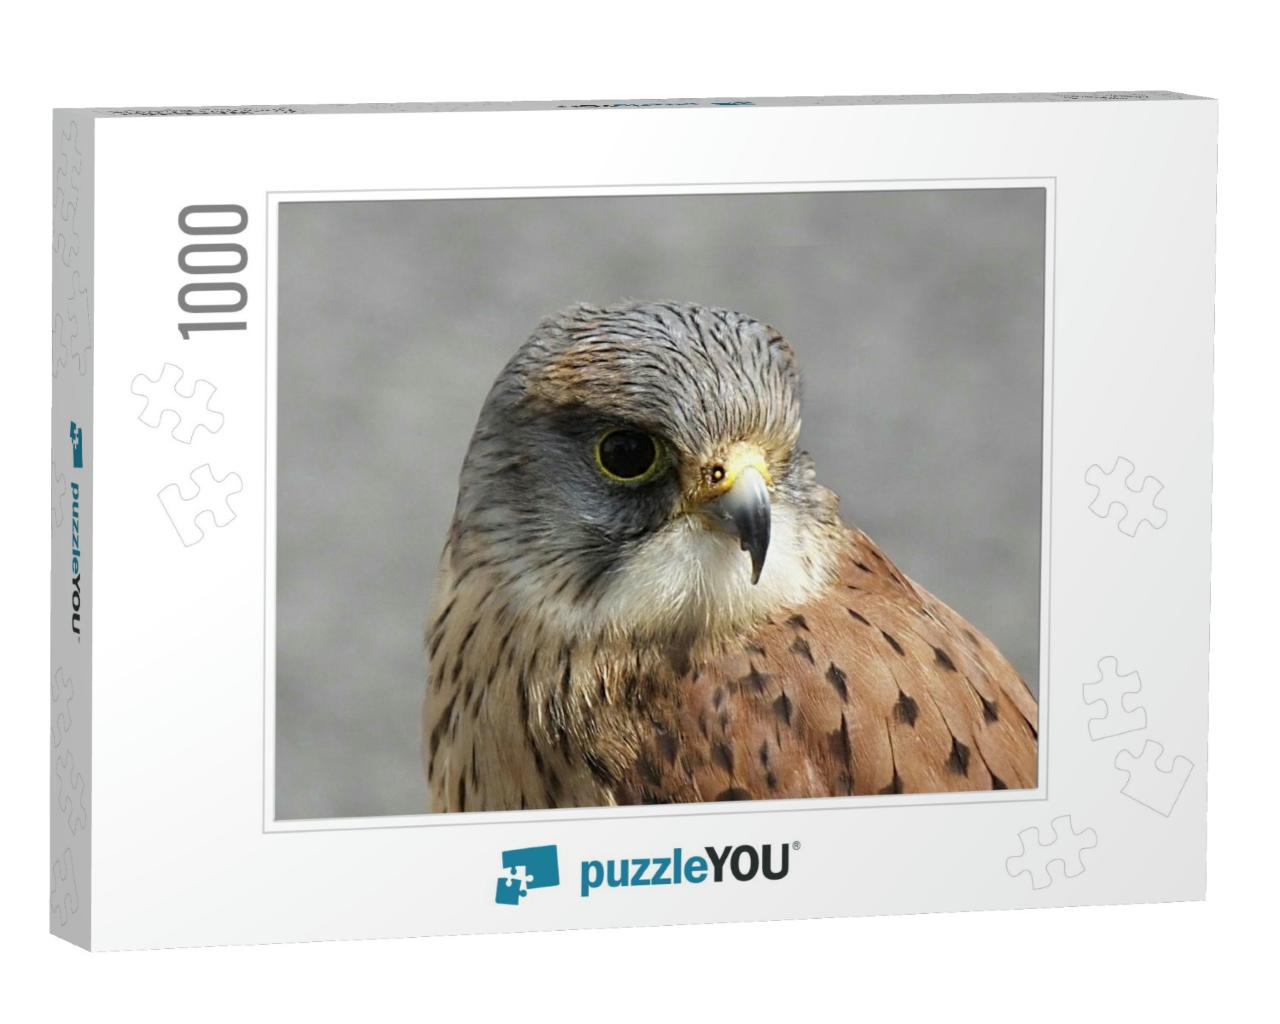 Kestrel Falcon At Game Fair Co Antrim Northern Ireland... Jigsaw Puzzle with 1000 pieces